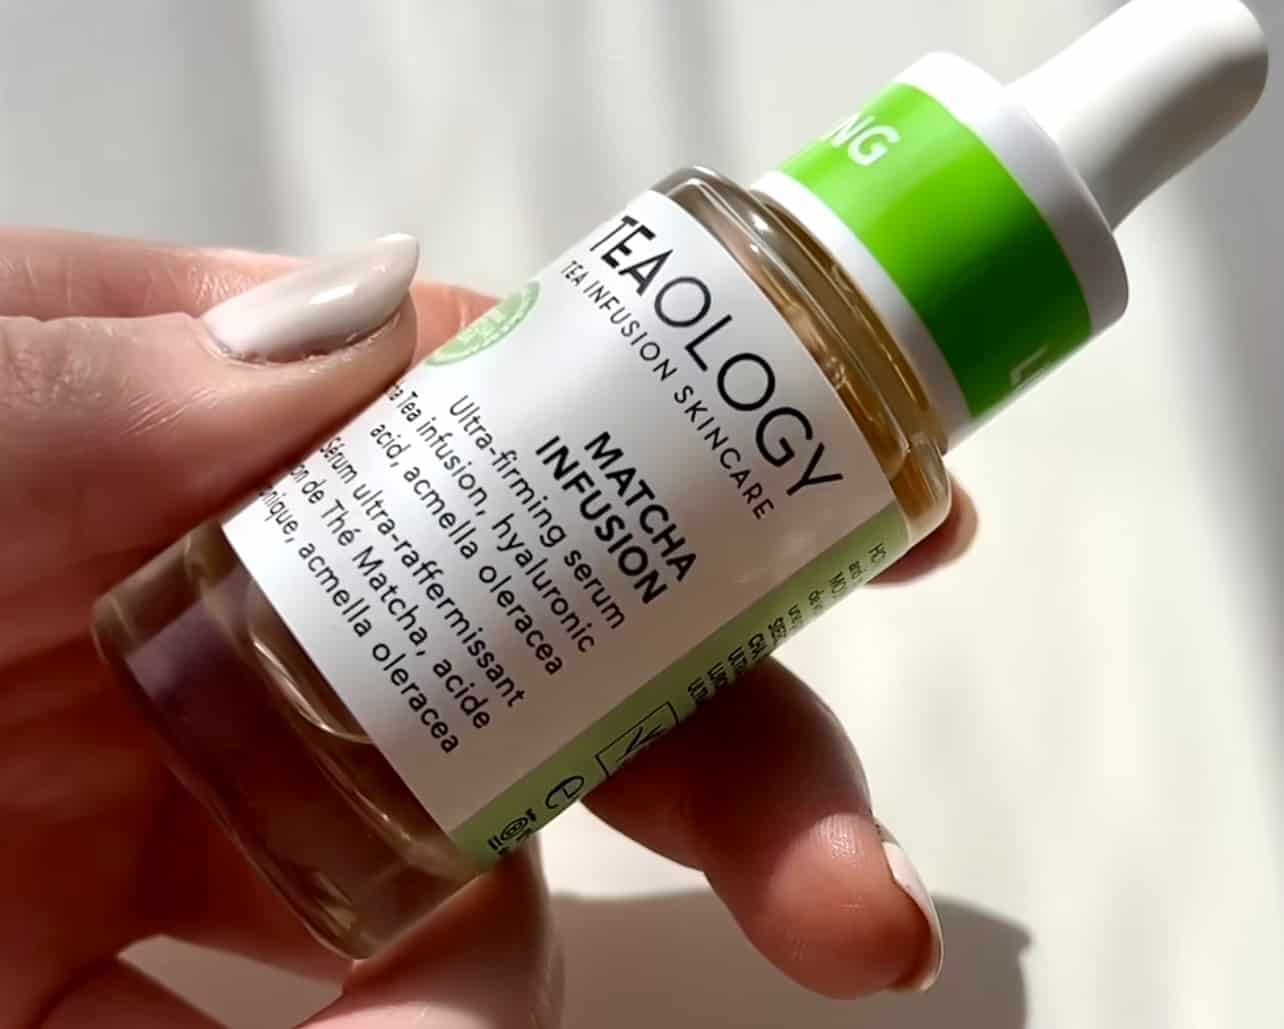 Teaology: Brewing Beauty with the Ultra-Firming Matcha Serum